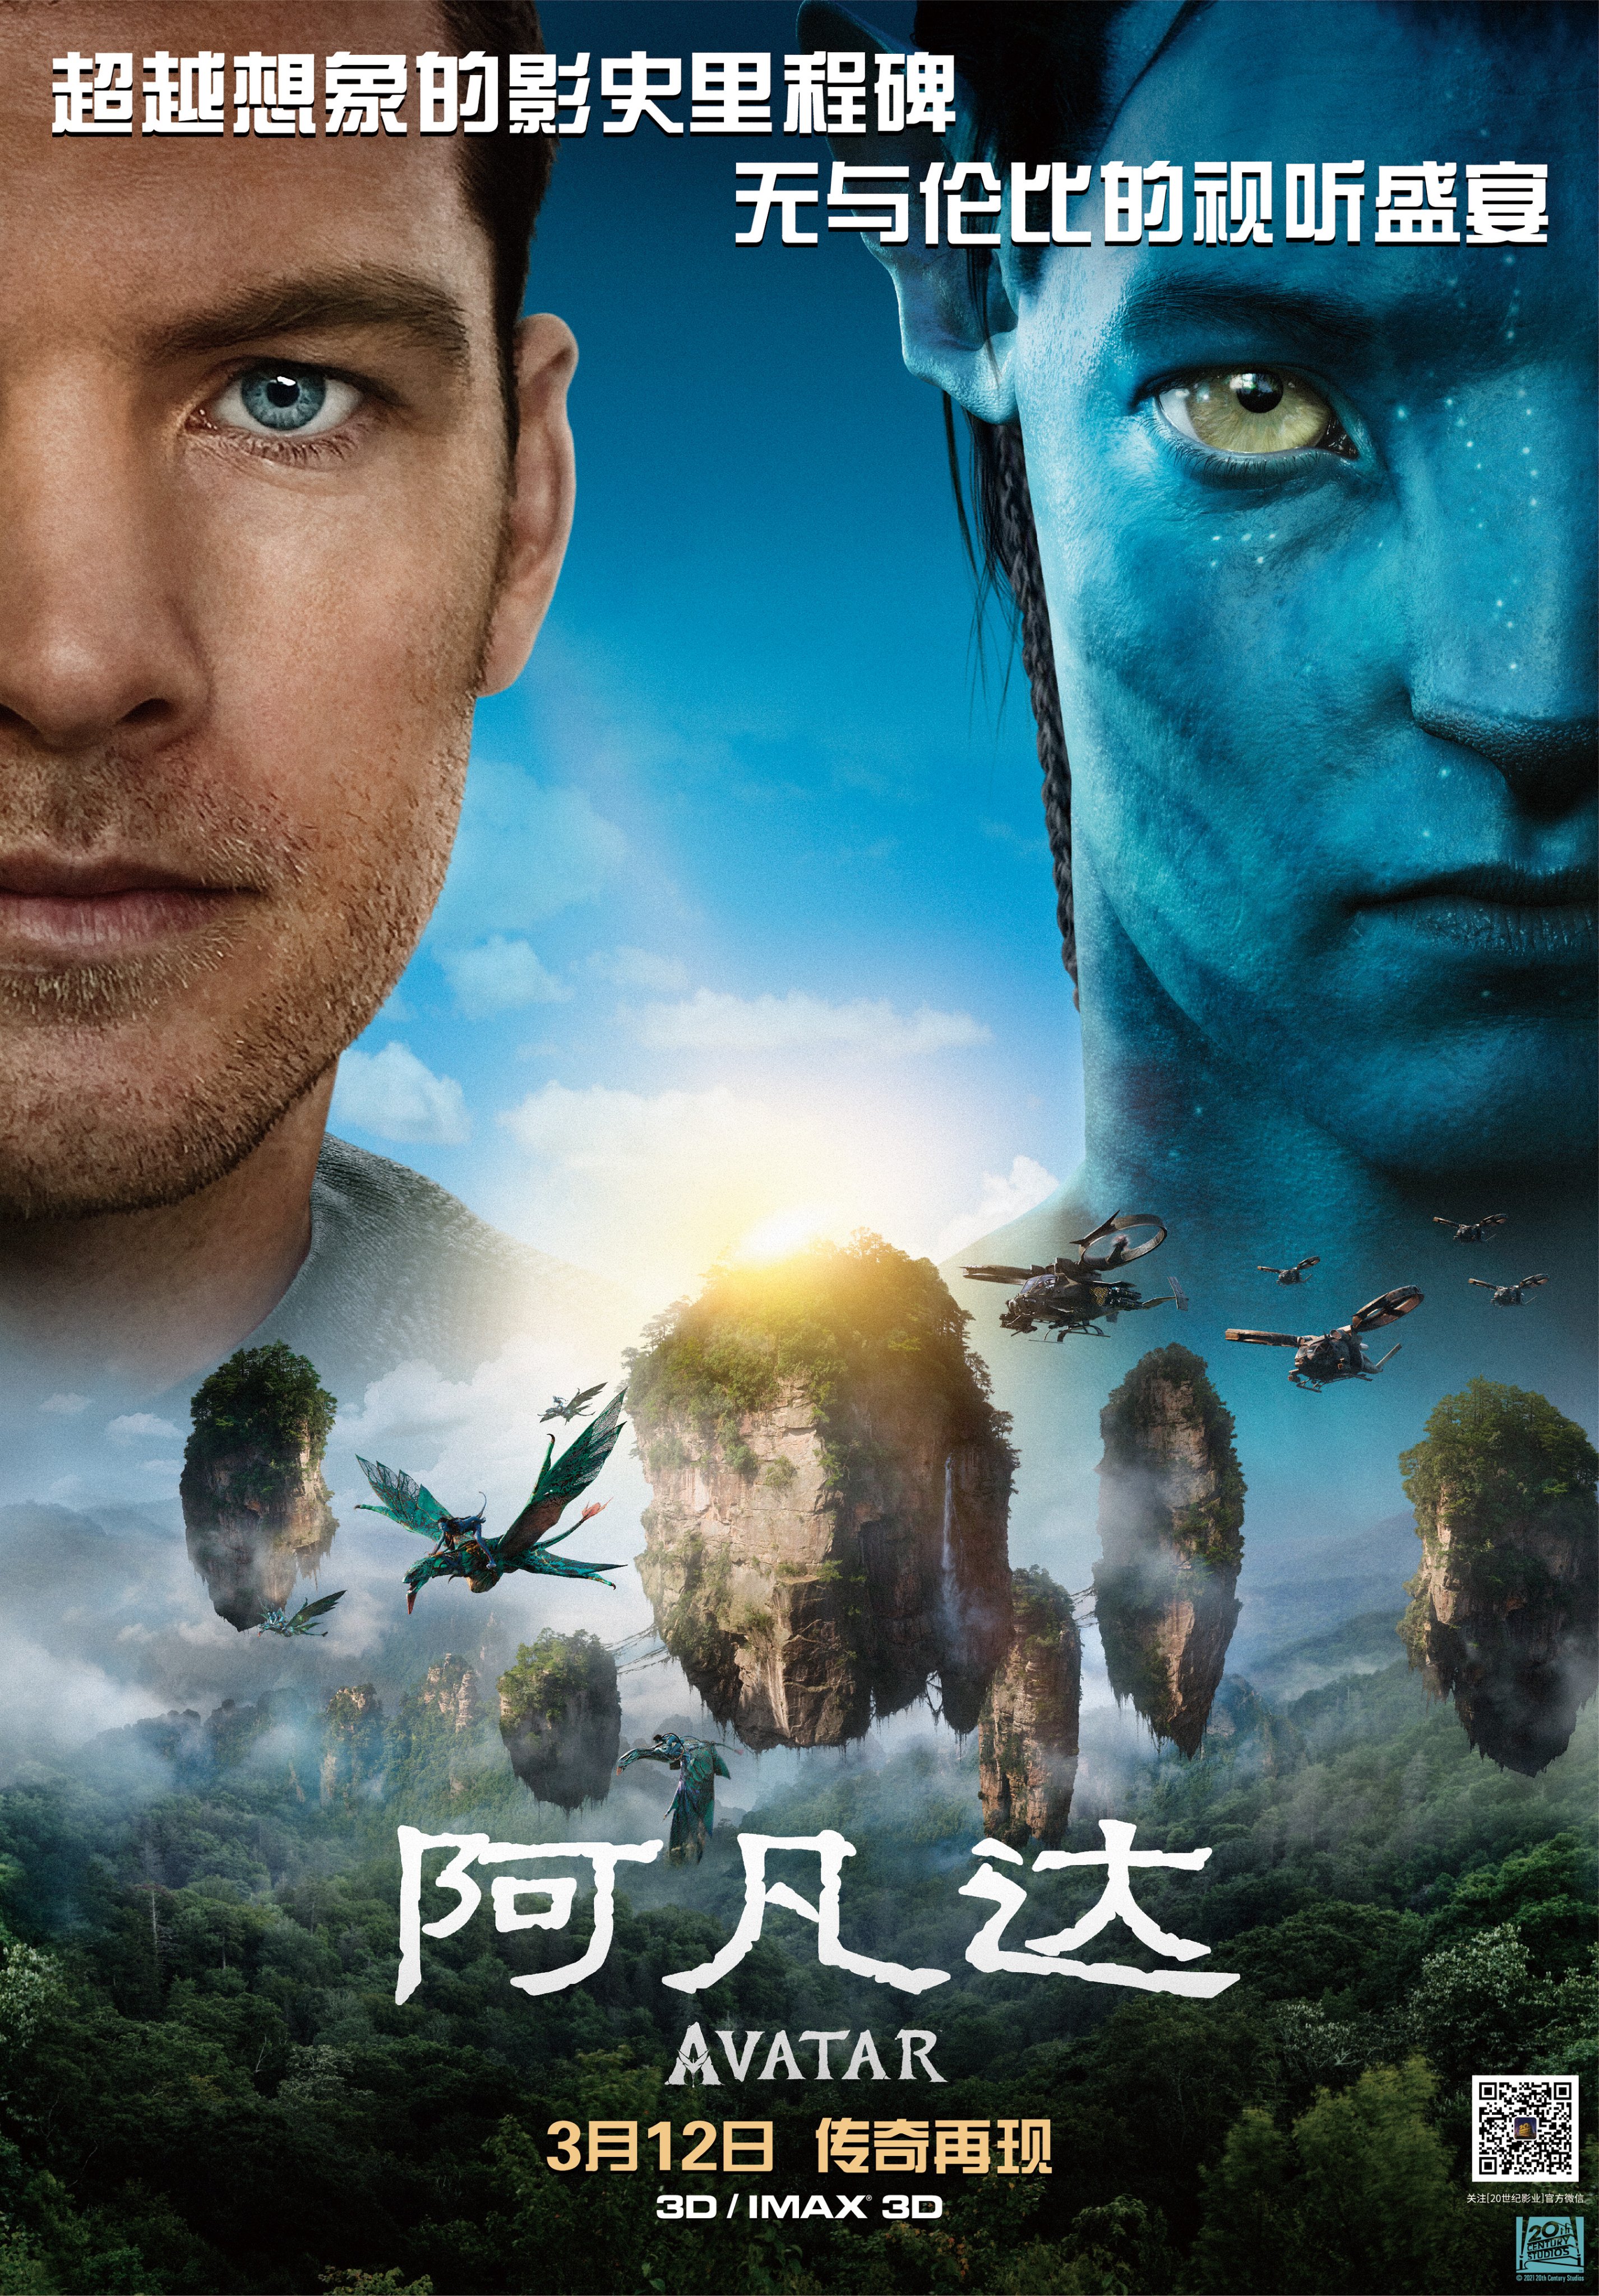 'Avatar' retakes box office crown from 'Avengers: Endgame' after China rerelease